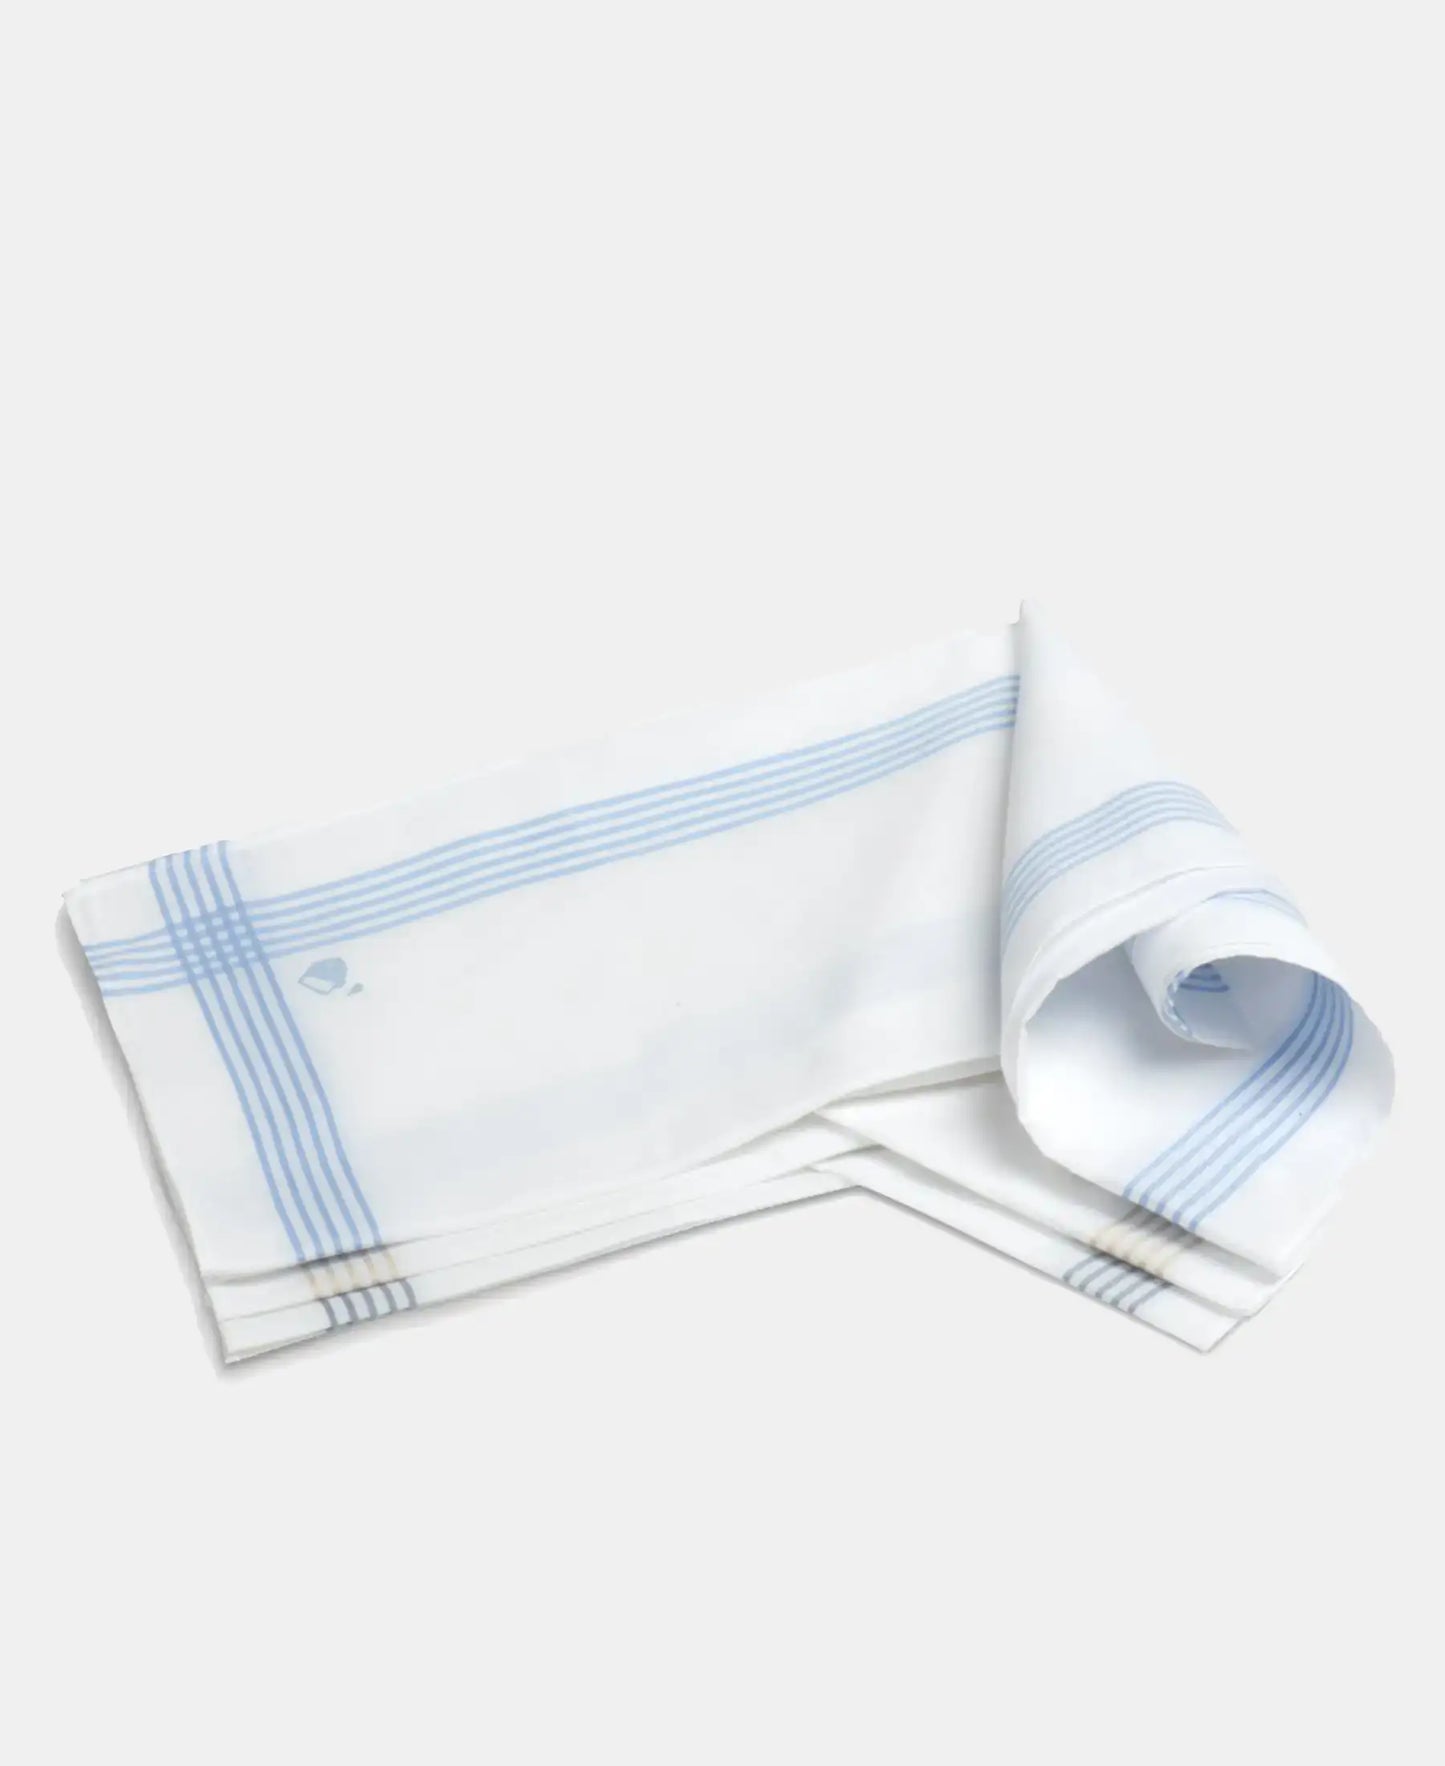 Super Combed Cotton Striped Border Handkerchief with Stay Fresh Properties - White (Pack of 3)